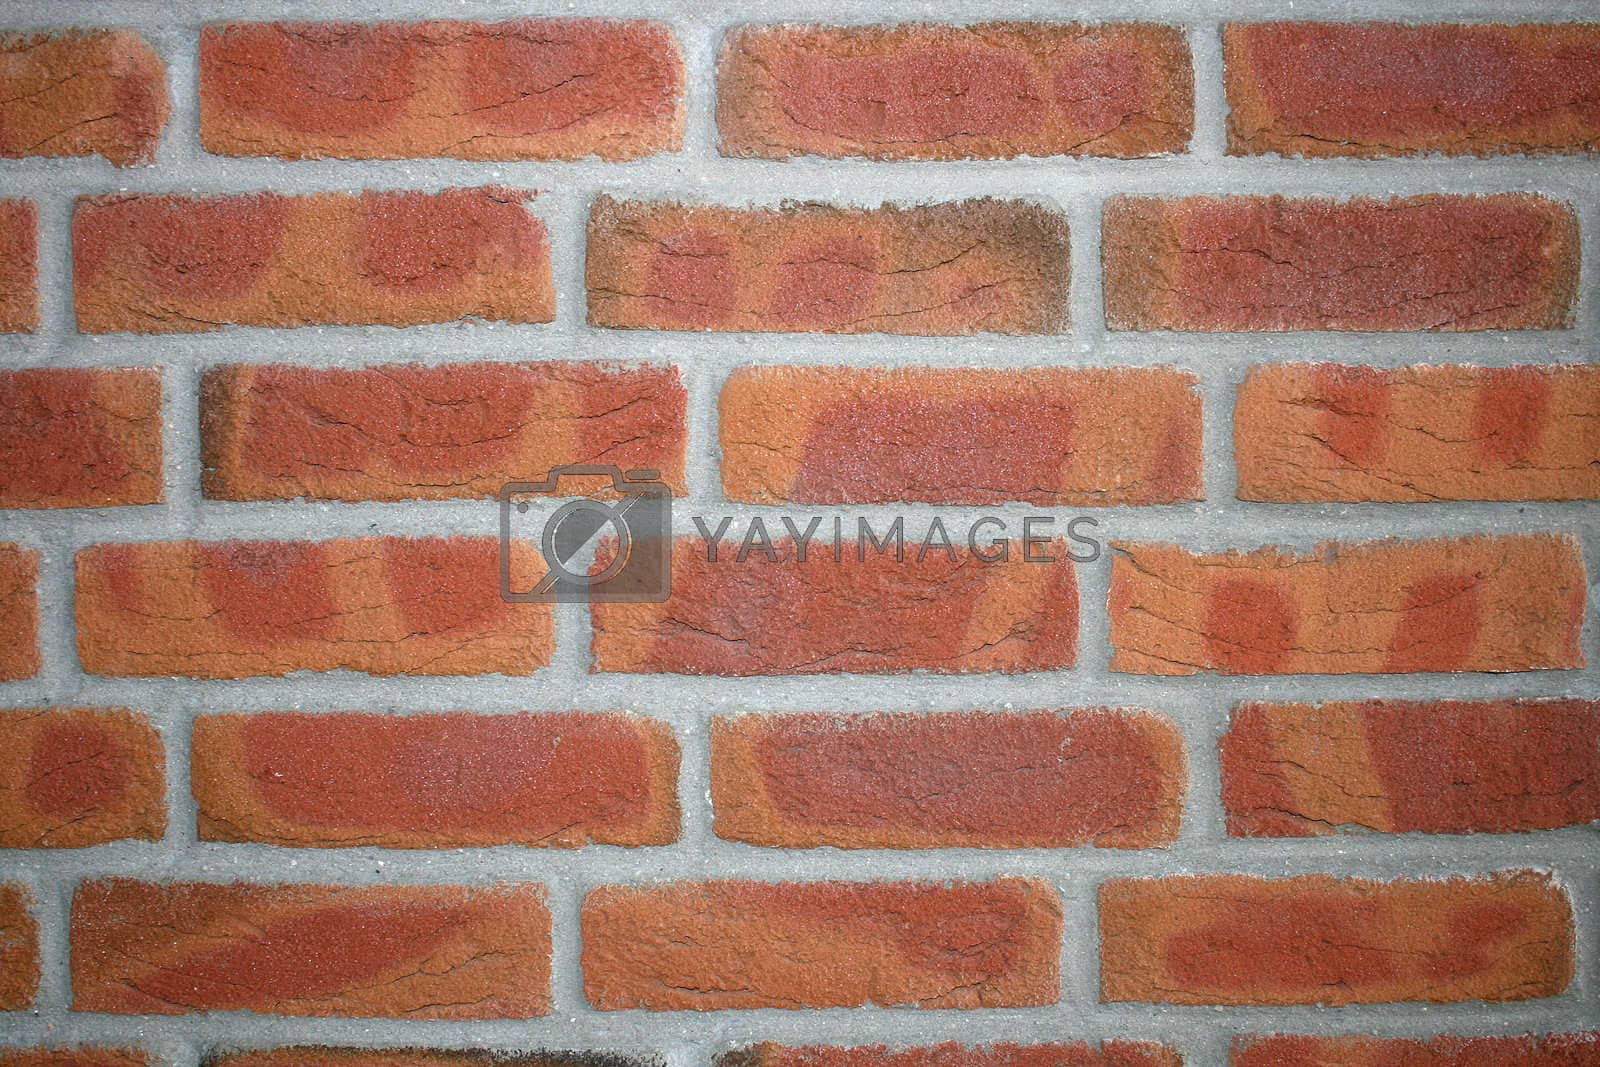 Royalty free image of a red brick-wall by Brightdawn